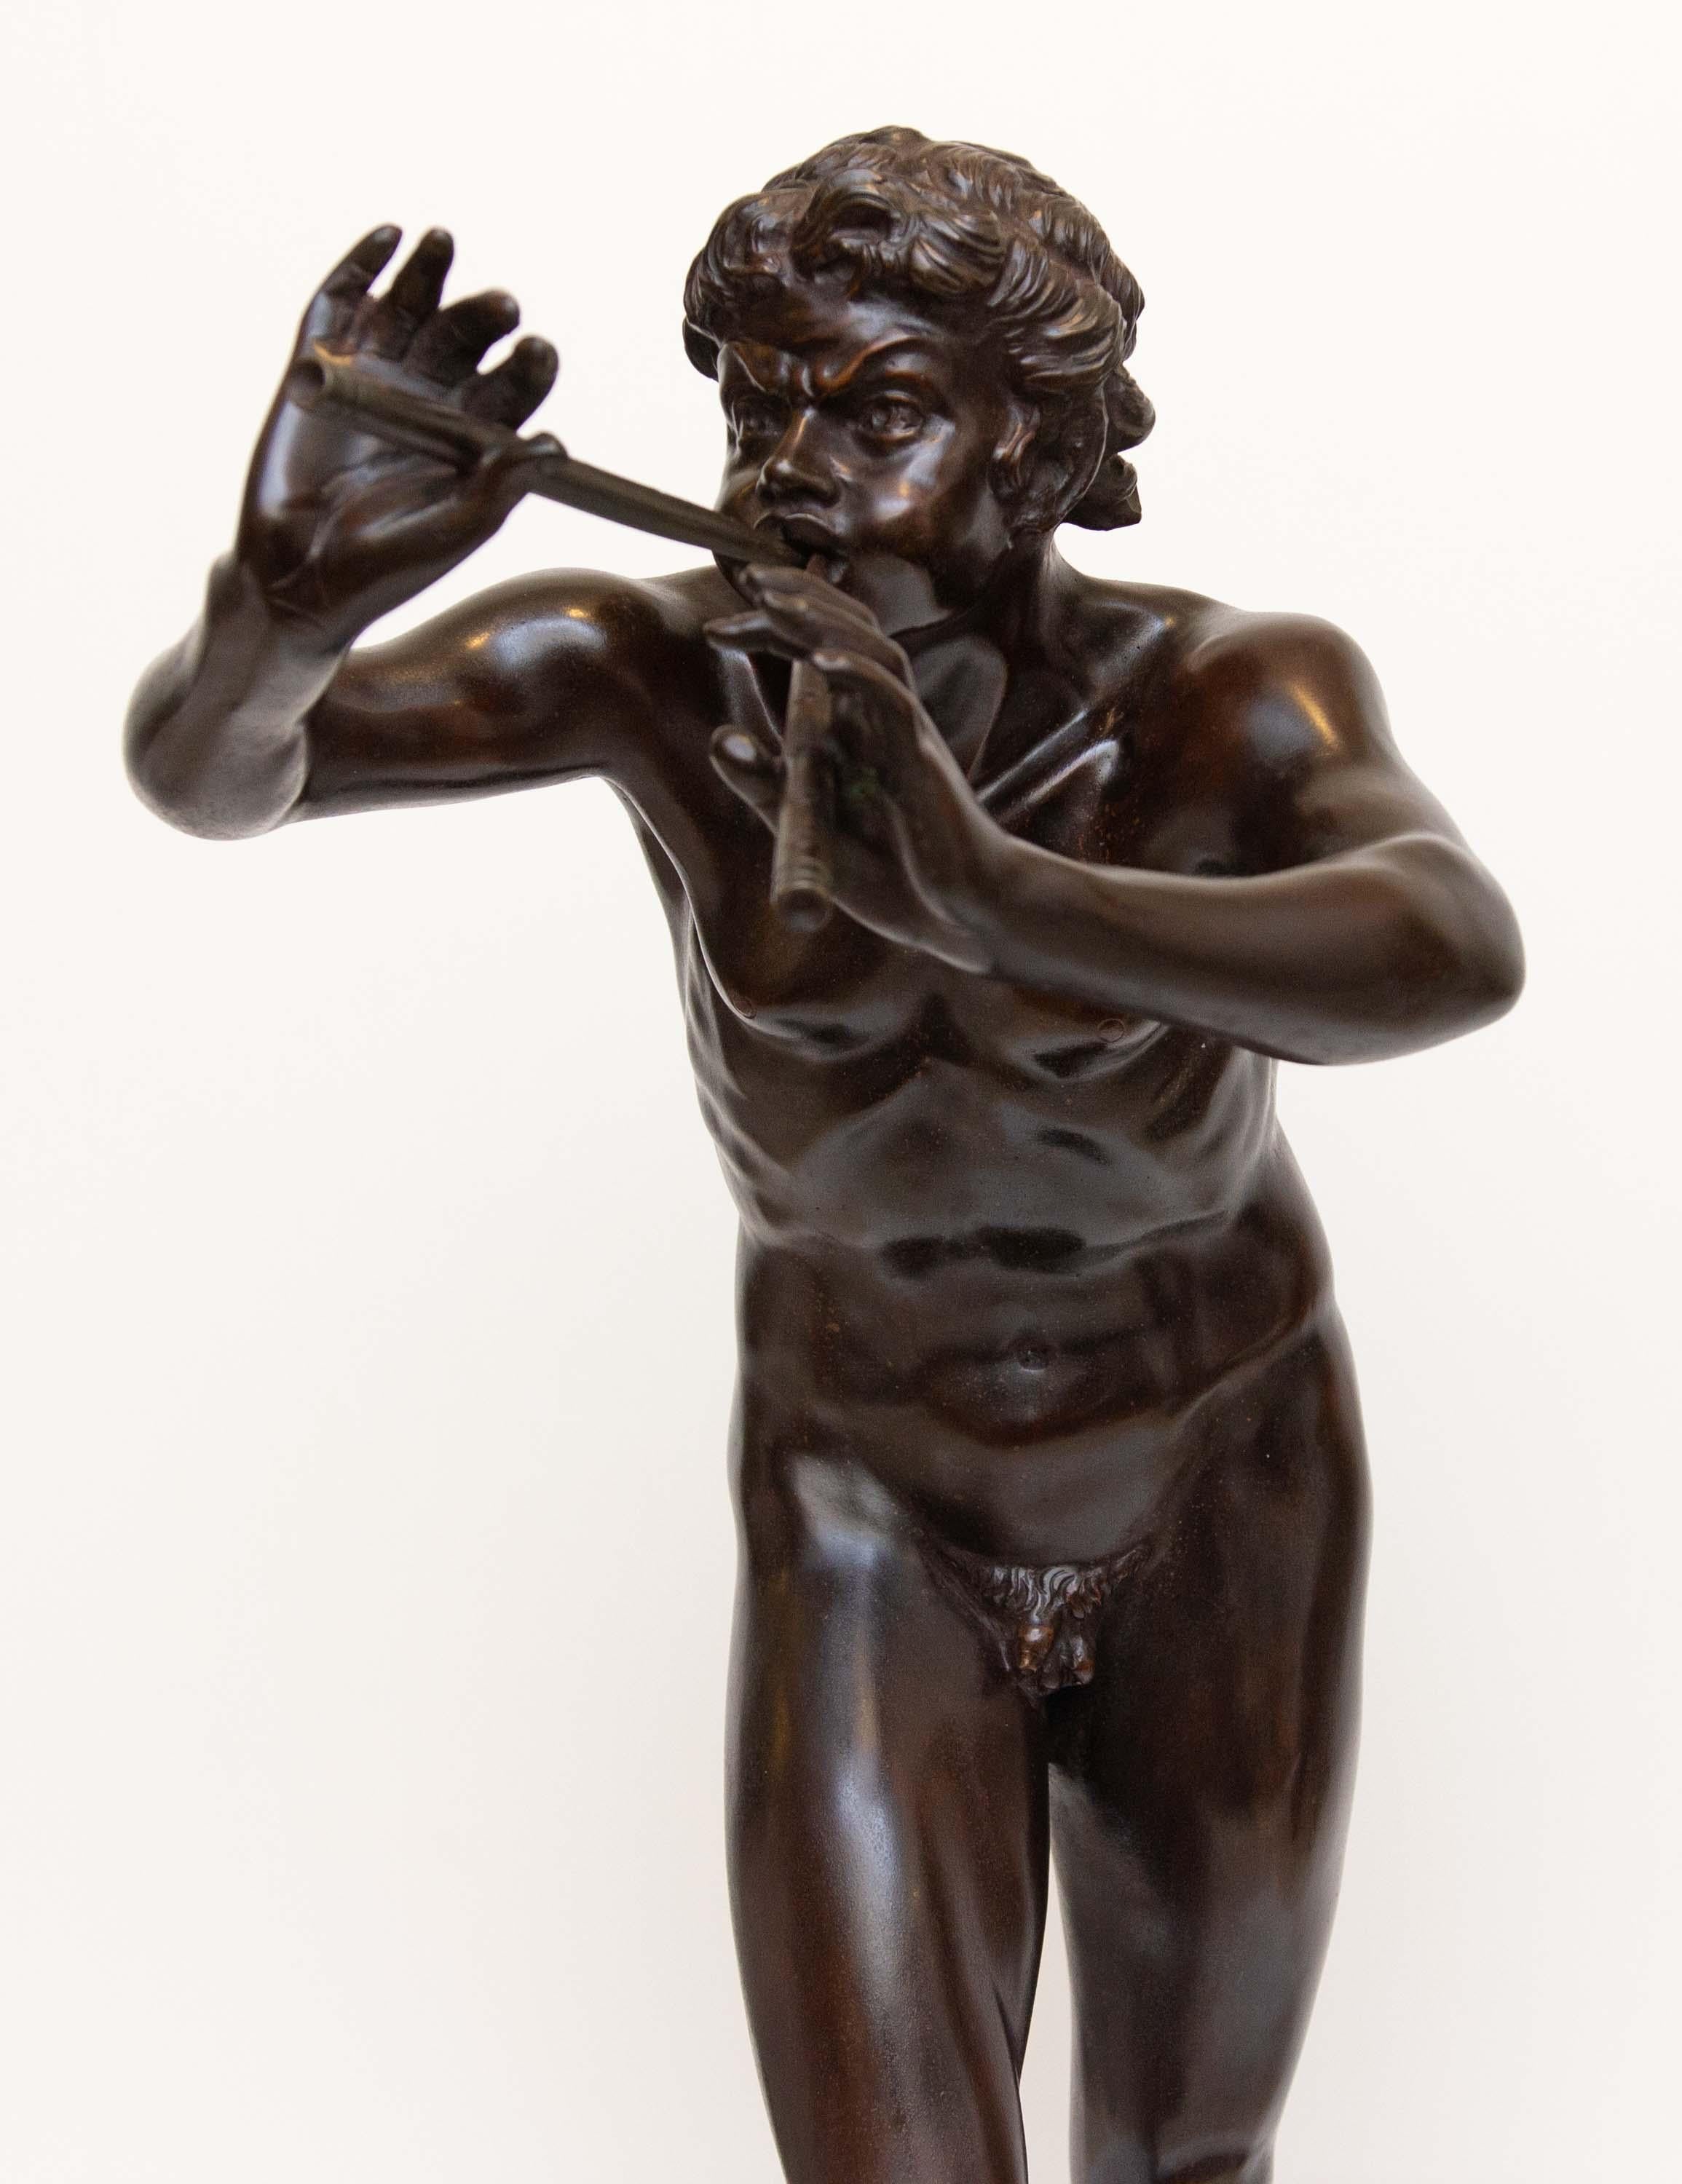 Early 20th century bronze statue of a nude Pan playing the flute. Signed F. De Luca. Grand Tour.